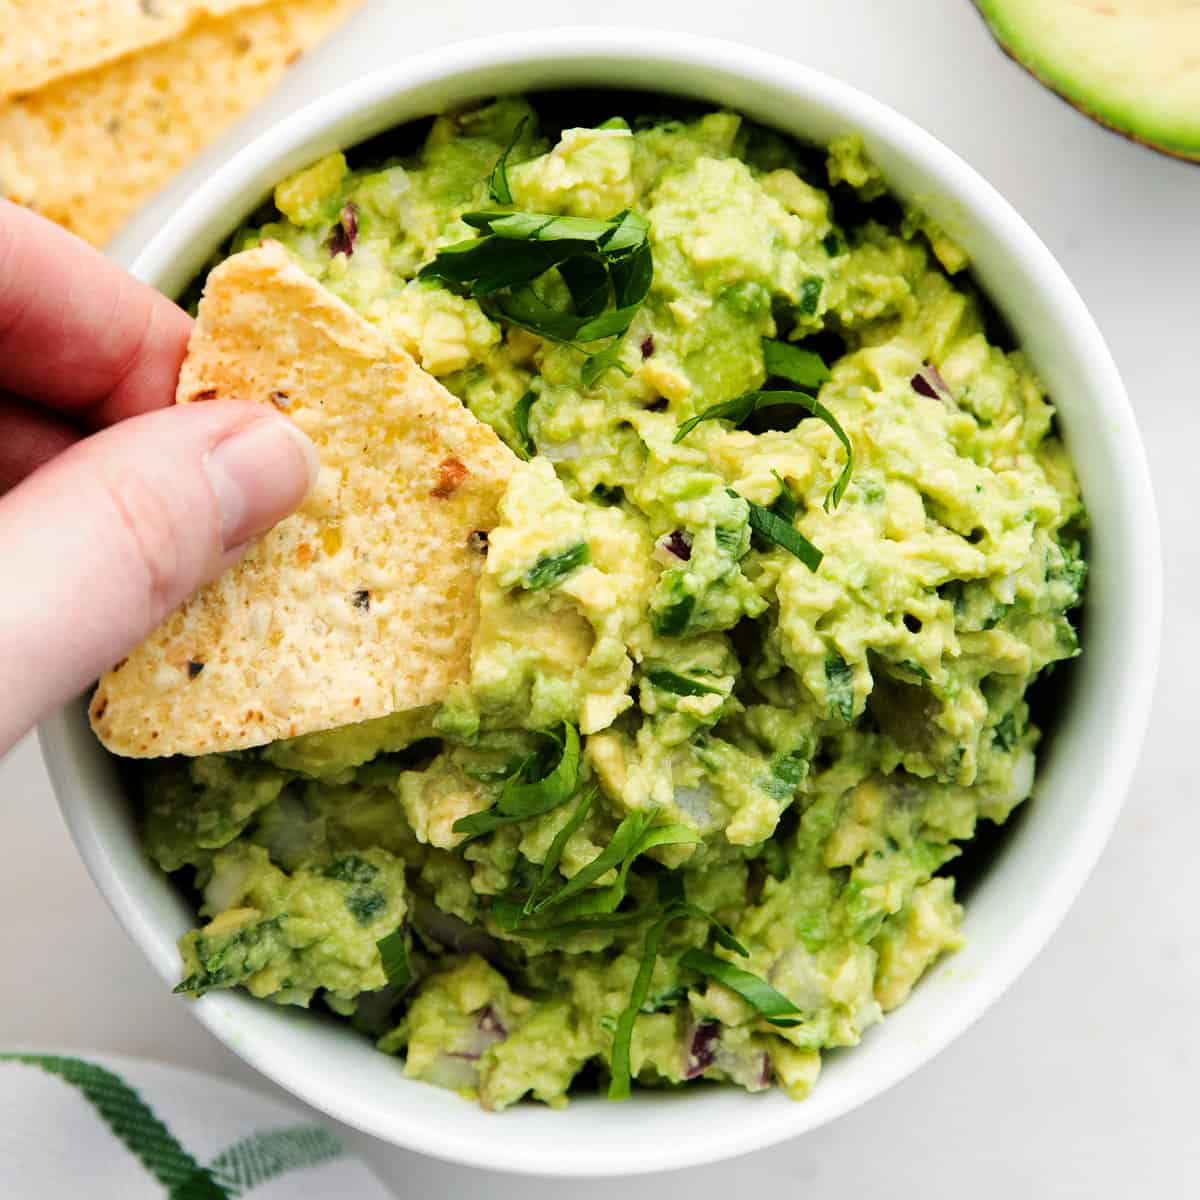 https://fitfoodiefinds.com/wp-content/uploads/2021/02/Guacamole-sq-2.jpg